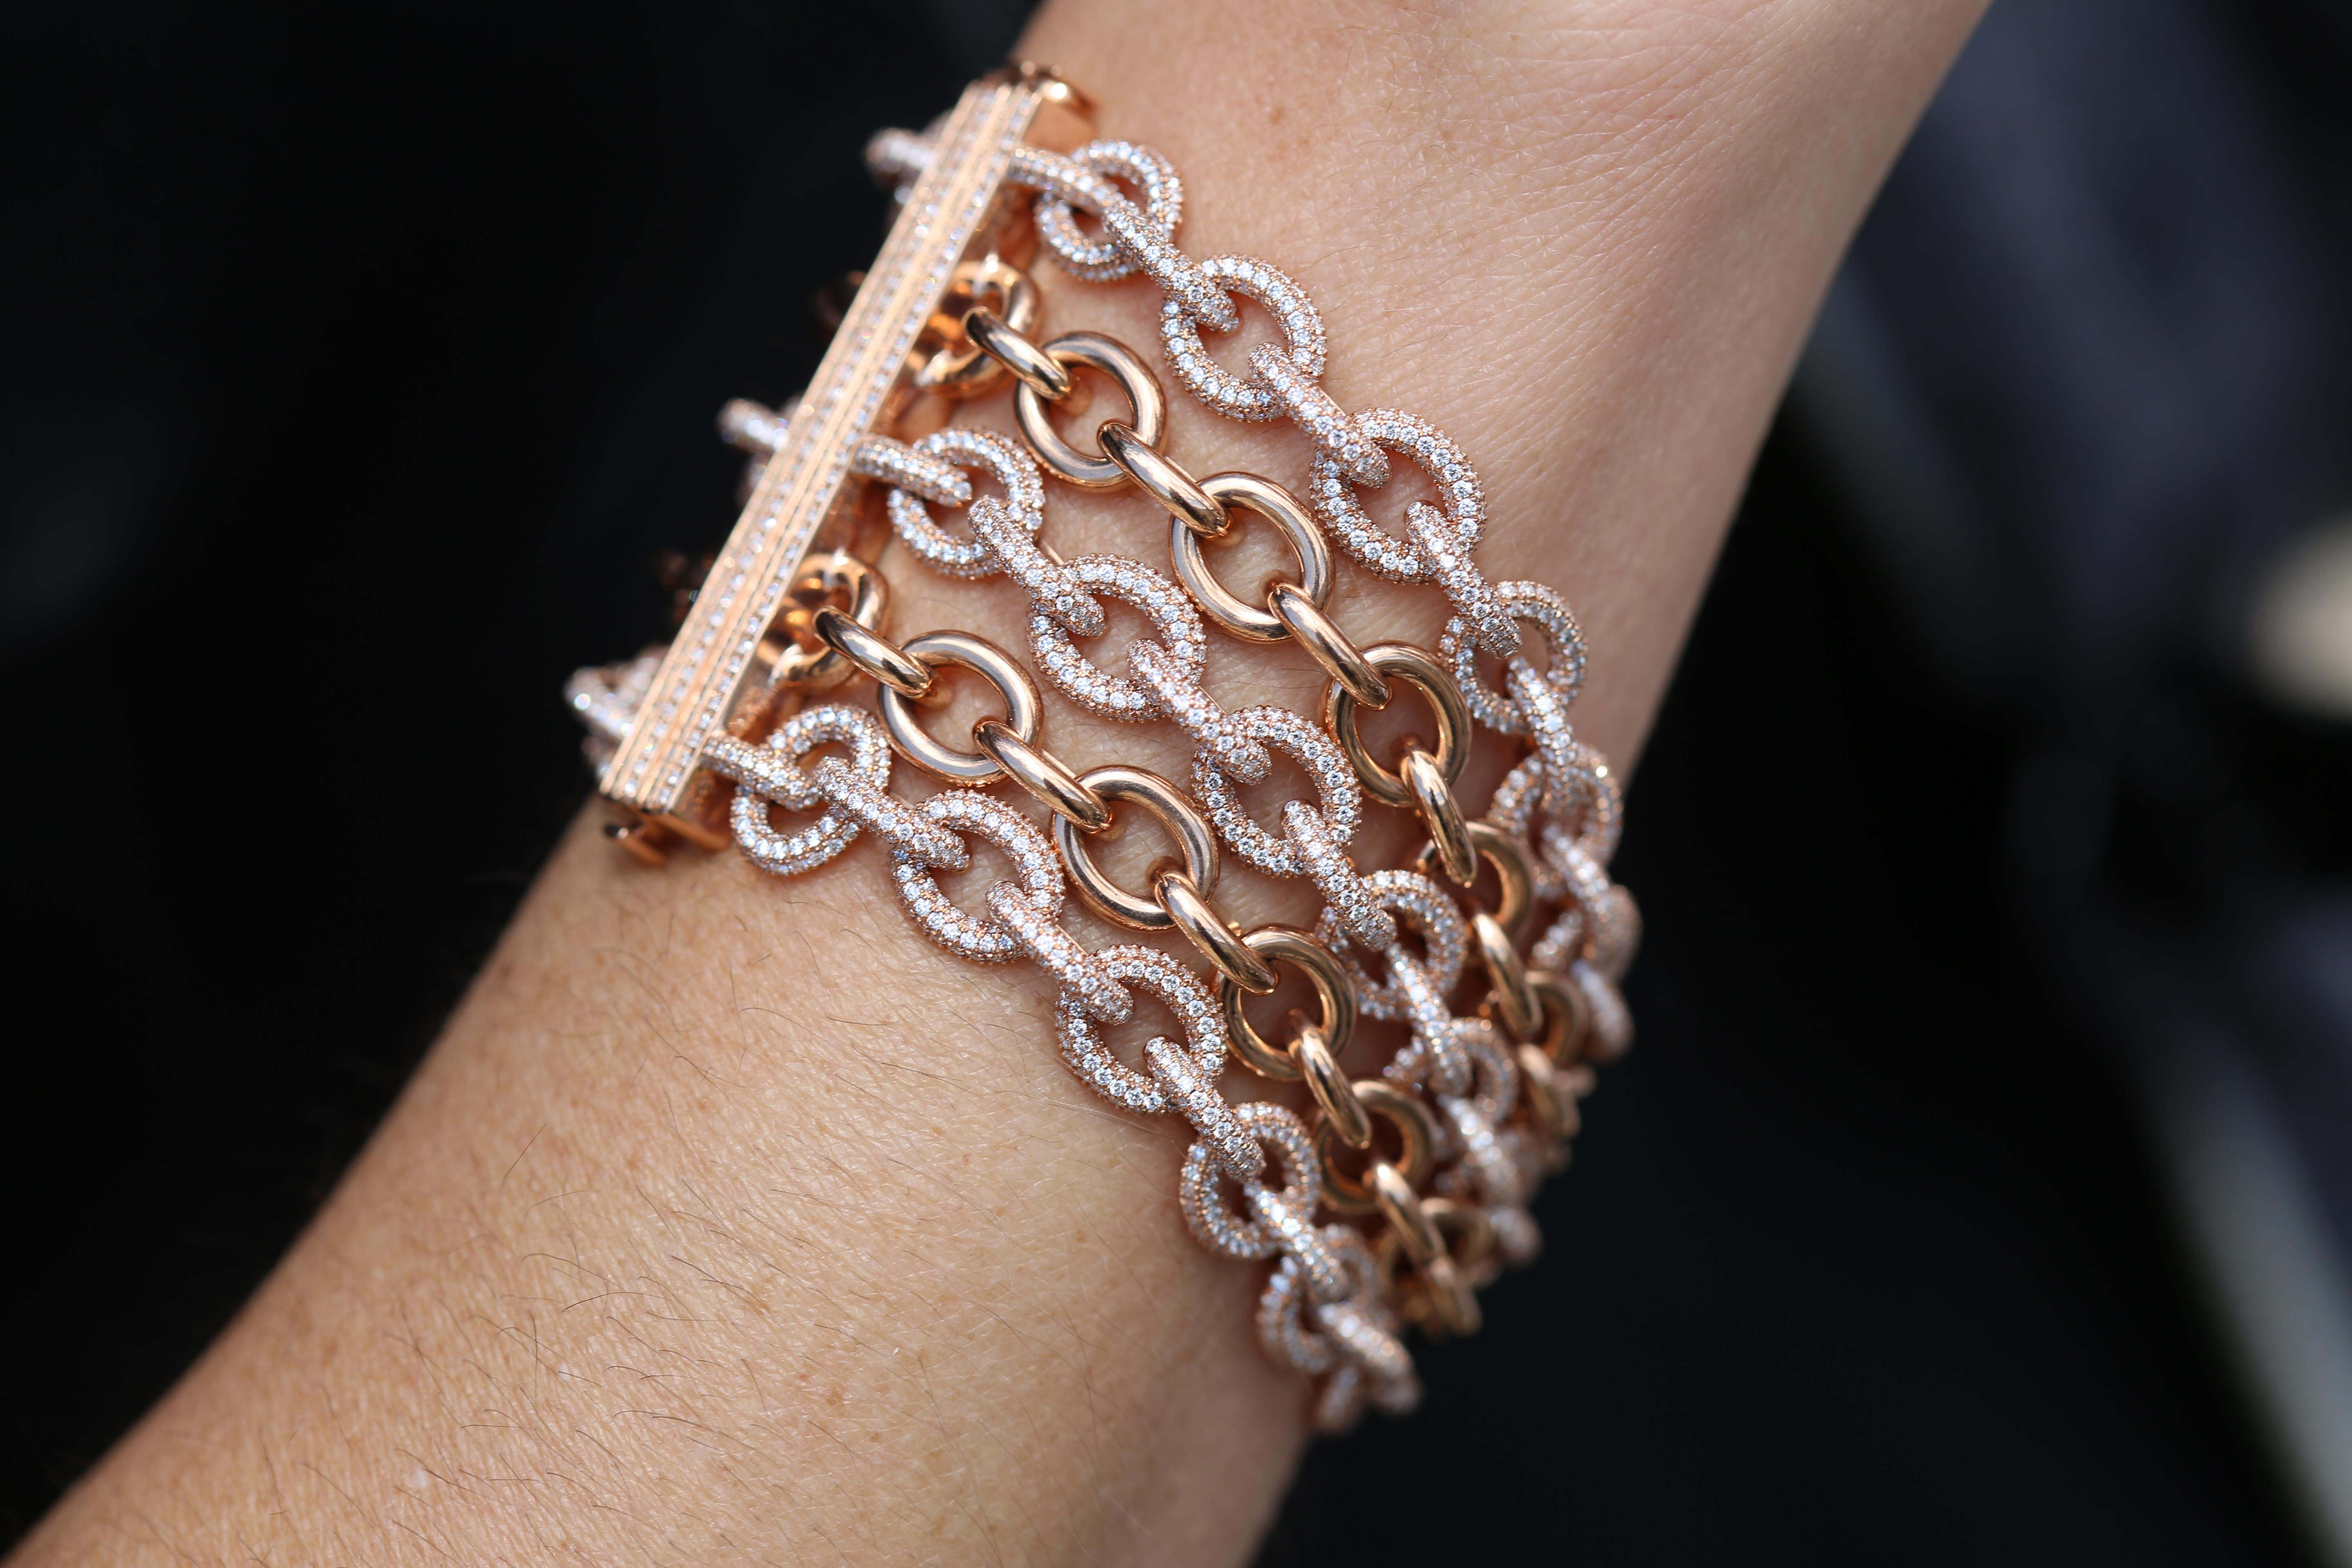 From the Bhansali CONNECT Collection, this chain link bracelet is set in 18kt Rose Gold with 4,426 Round Brilliant-Cut Diamonds (14cts.) This understated, yet glamorous collection was inspired by the expressive and confident women of the 1980s.
